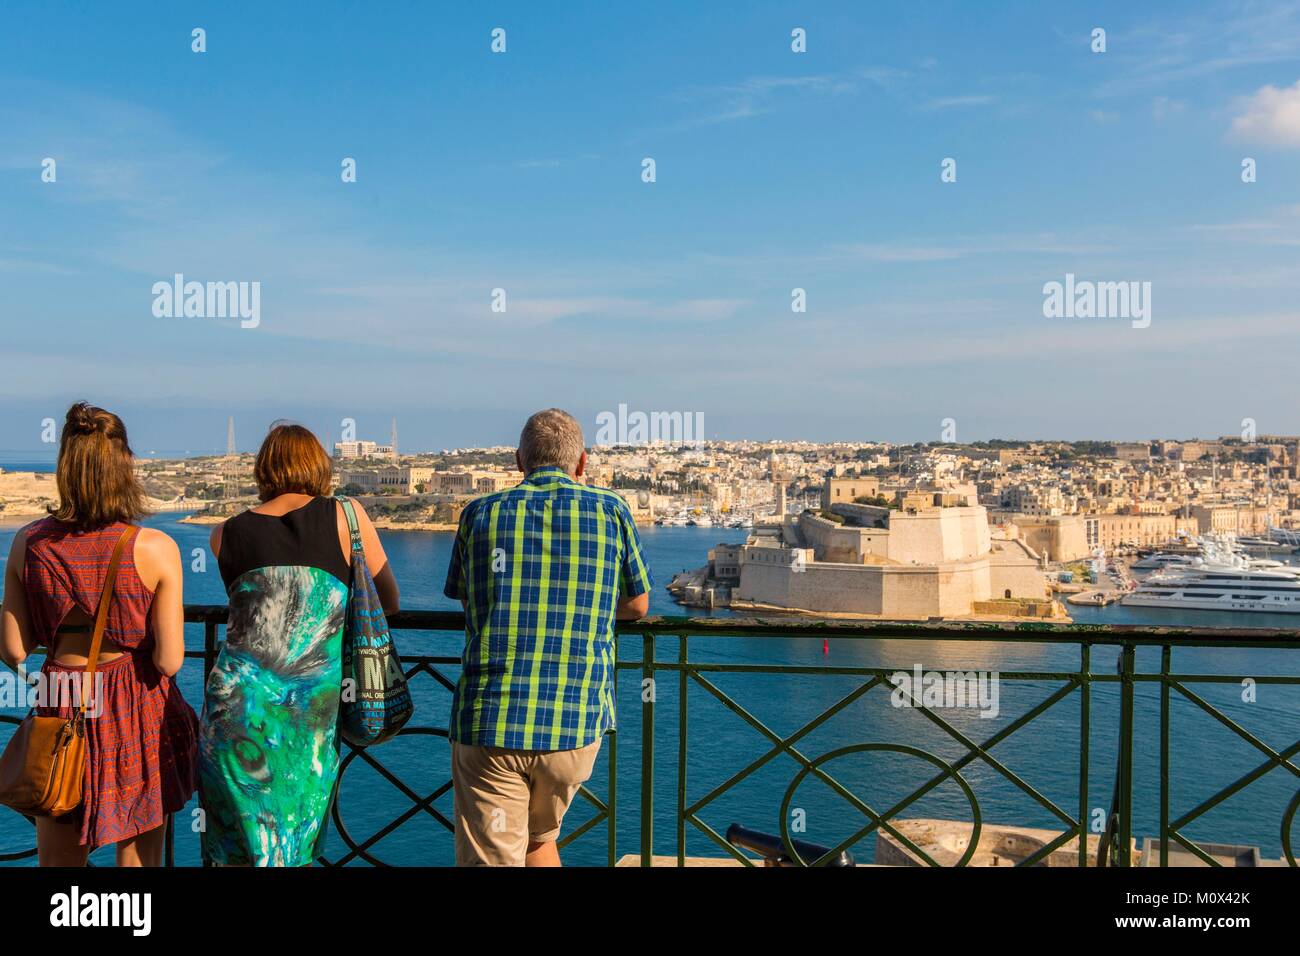 Malta,Valletta,listed as World Heritage by UNESCO,the Upper Barraca gardens,a view of the Three Cities,Birgu with fort Sant Angelo Stock Photo